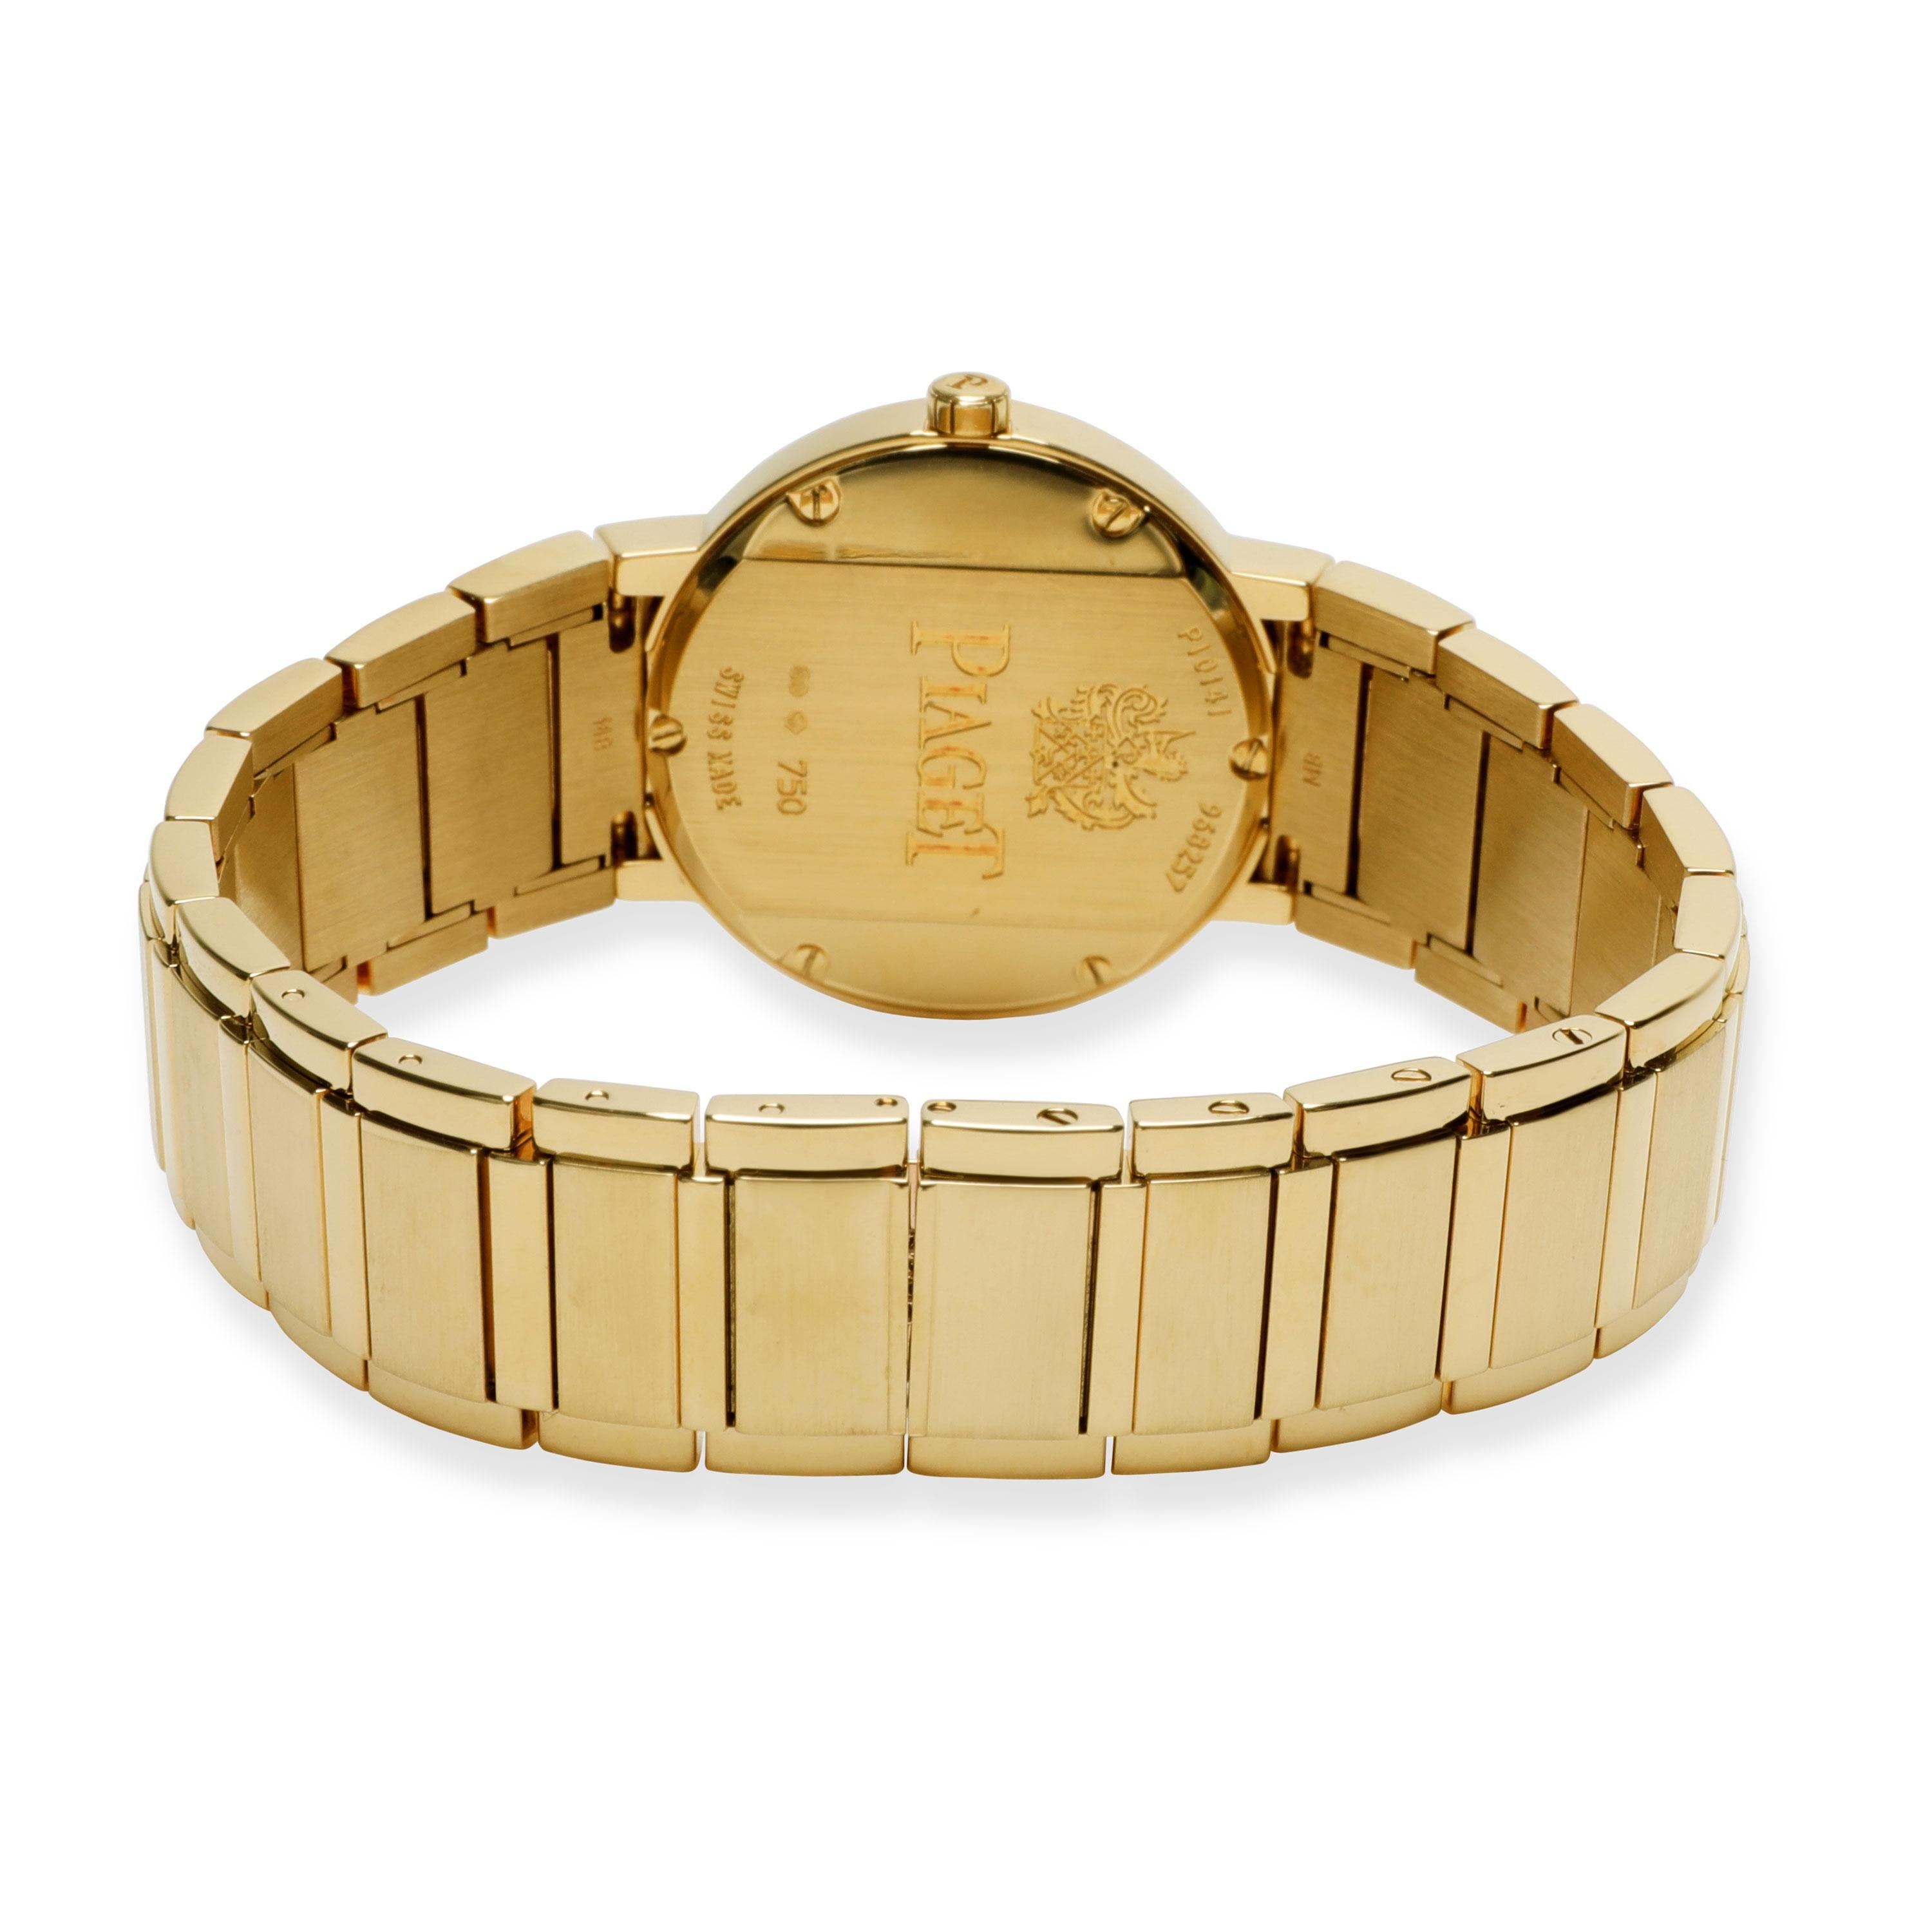 Piaget Polo GOA26032 Women's Watch in 18kt Yellow Gold

SKU: 105897

PRIMARY DETAILS
Brand:  Piaget
Model: Polo
Country of Origin: Switzerland
Movement Type: Quartz: Battery
Year of Manufacture: 2000-2009
Condition: Retail price 28500 USD. In